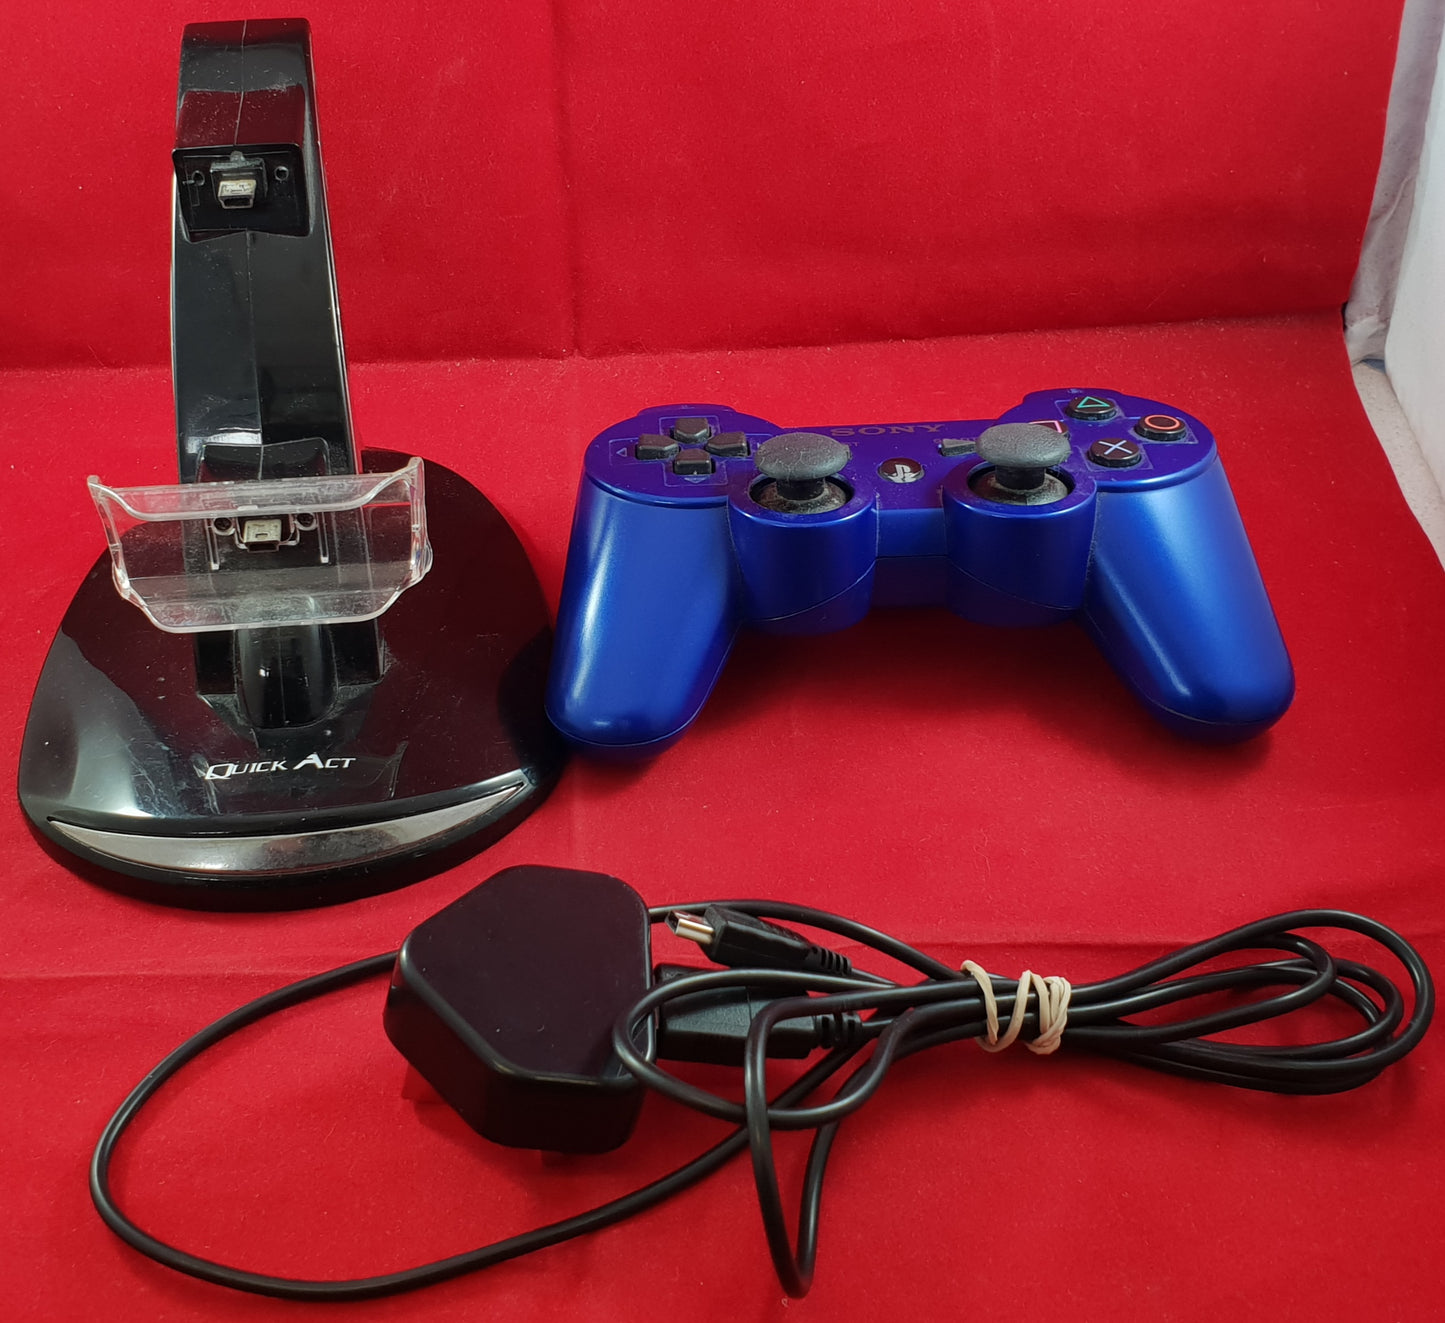 Quick Act Sony Playstation 3 (PS3) Charging Dock with Controller Accessory